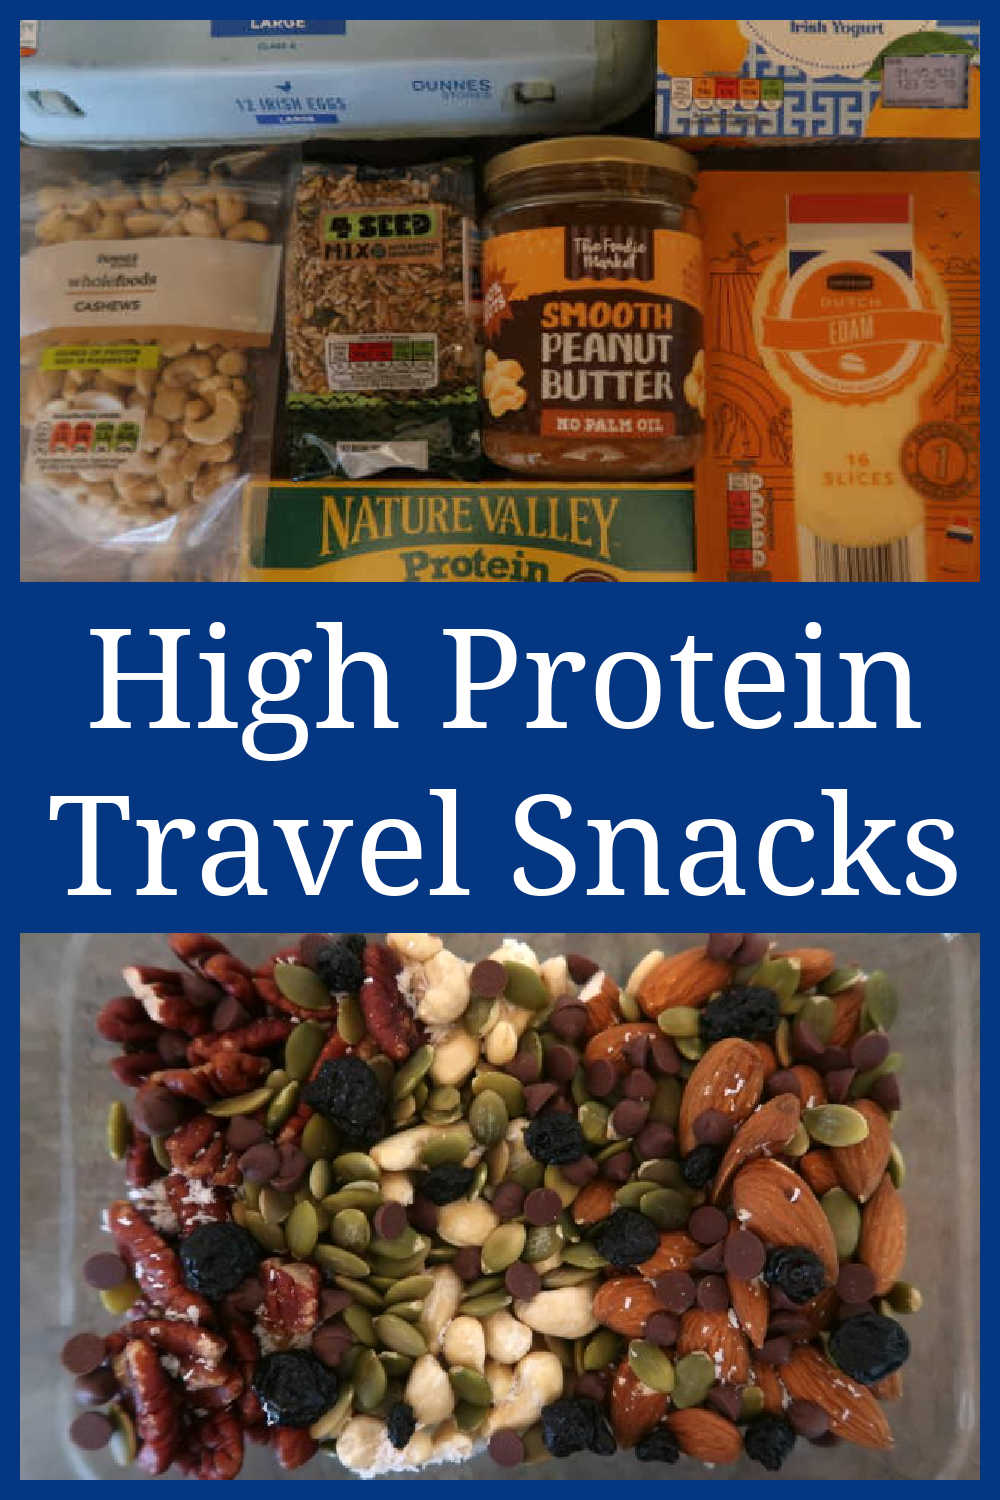 High Protein Travel Snacks - Best healthy high-protein snack ideas to pack for your trip for road, train or plane.